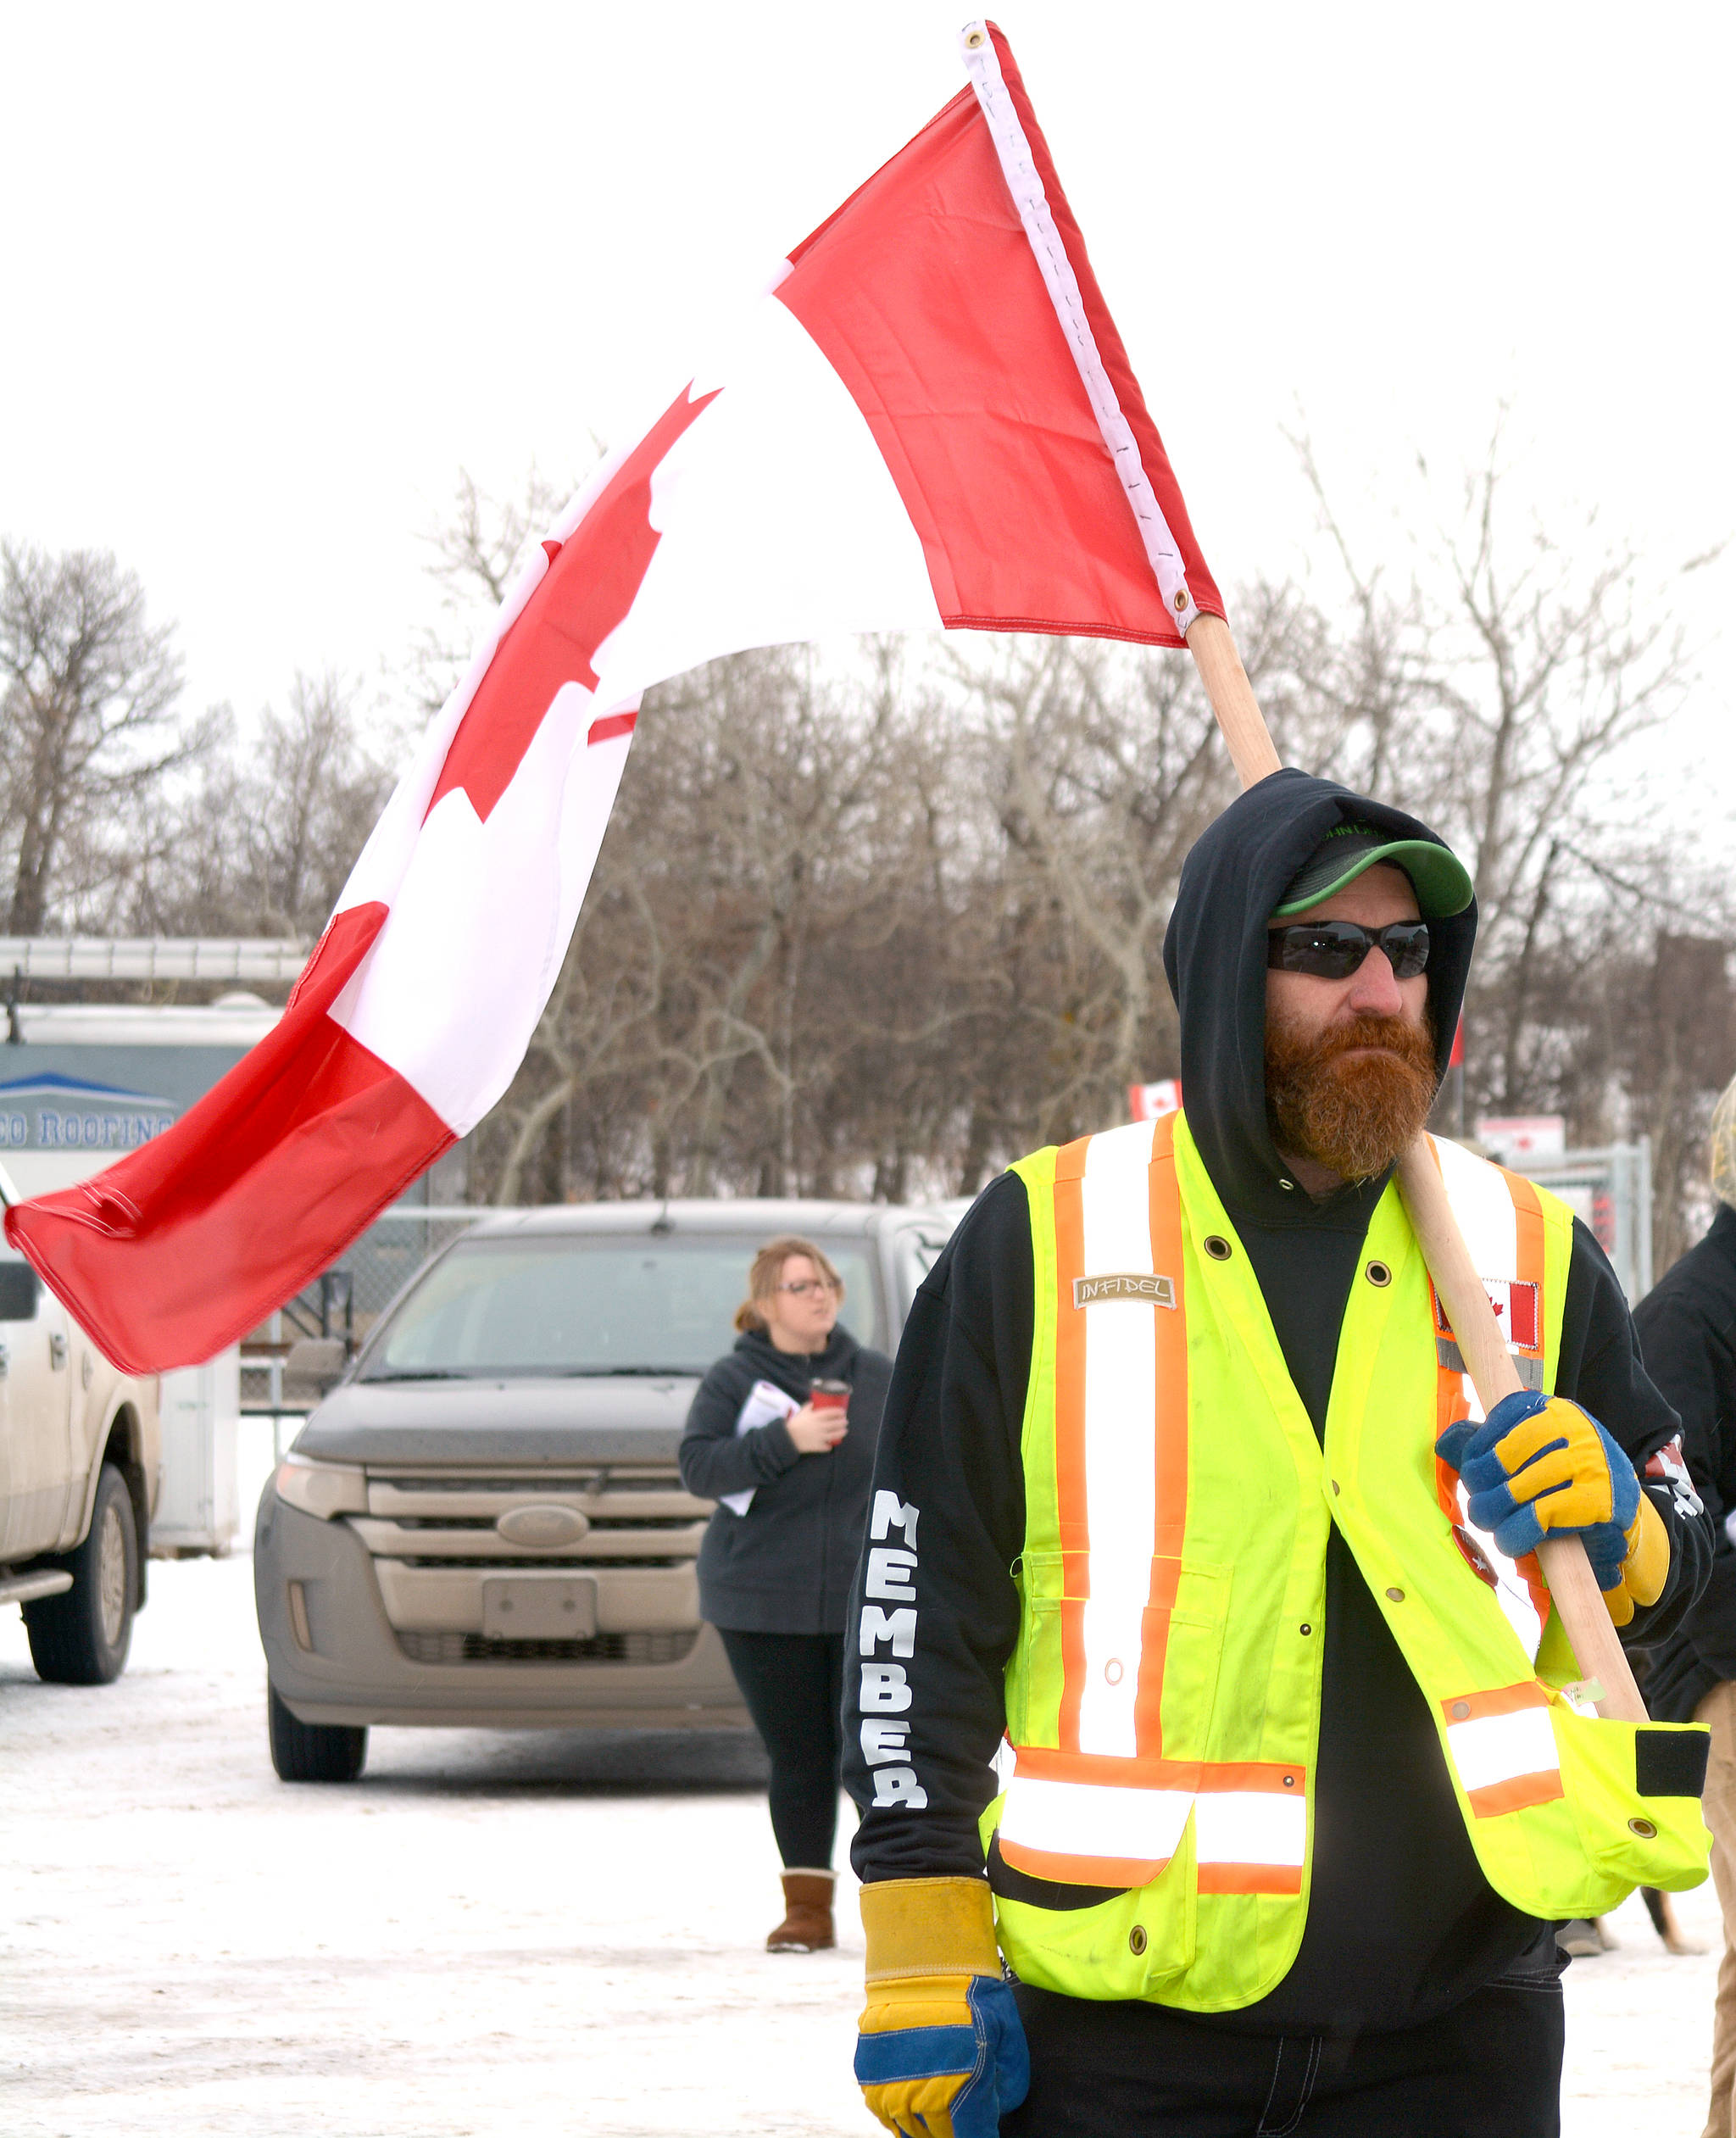 People came from Hanna and Drumheller to participate in Stettler’s Heartland Rally Jan. 26. (Lisa Joy/Stettler Independent)